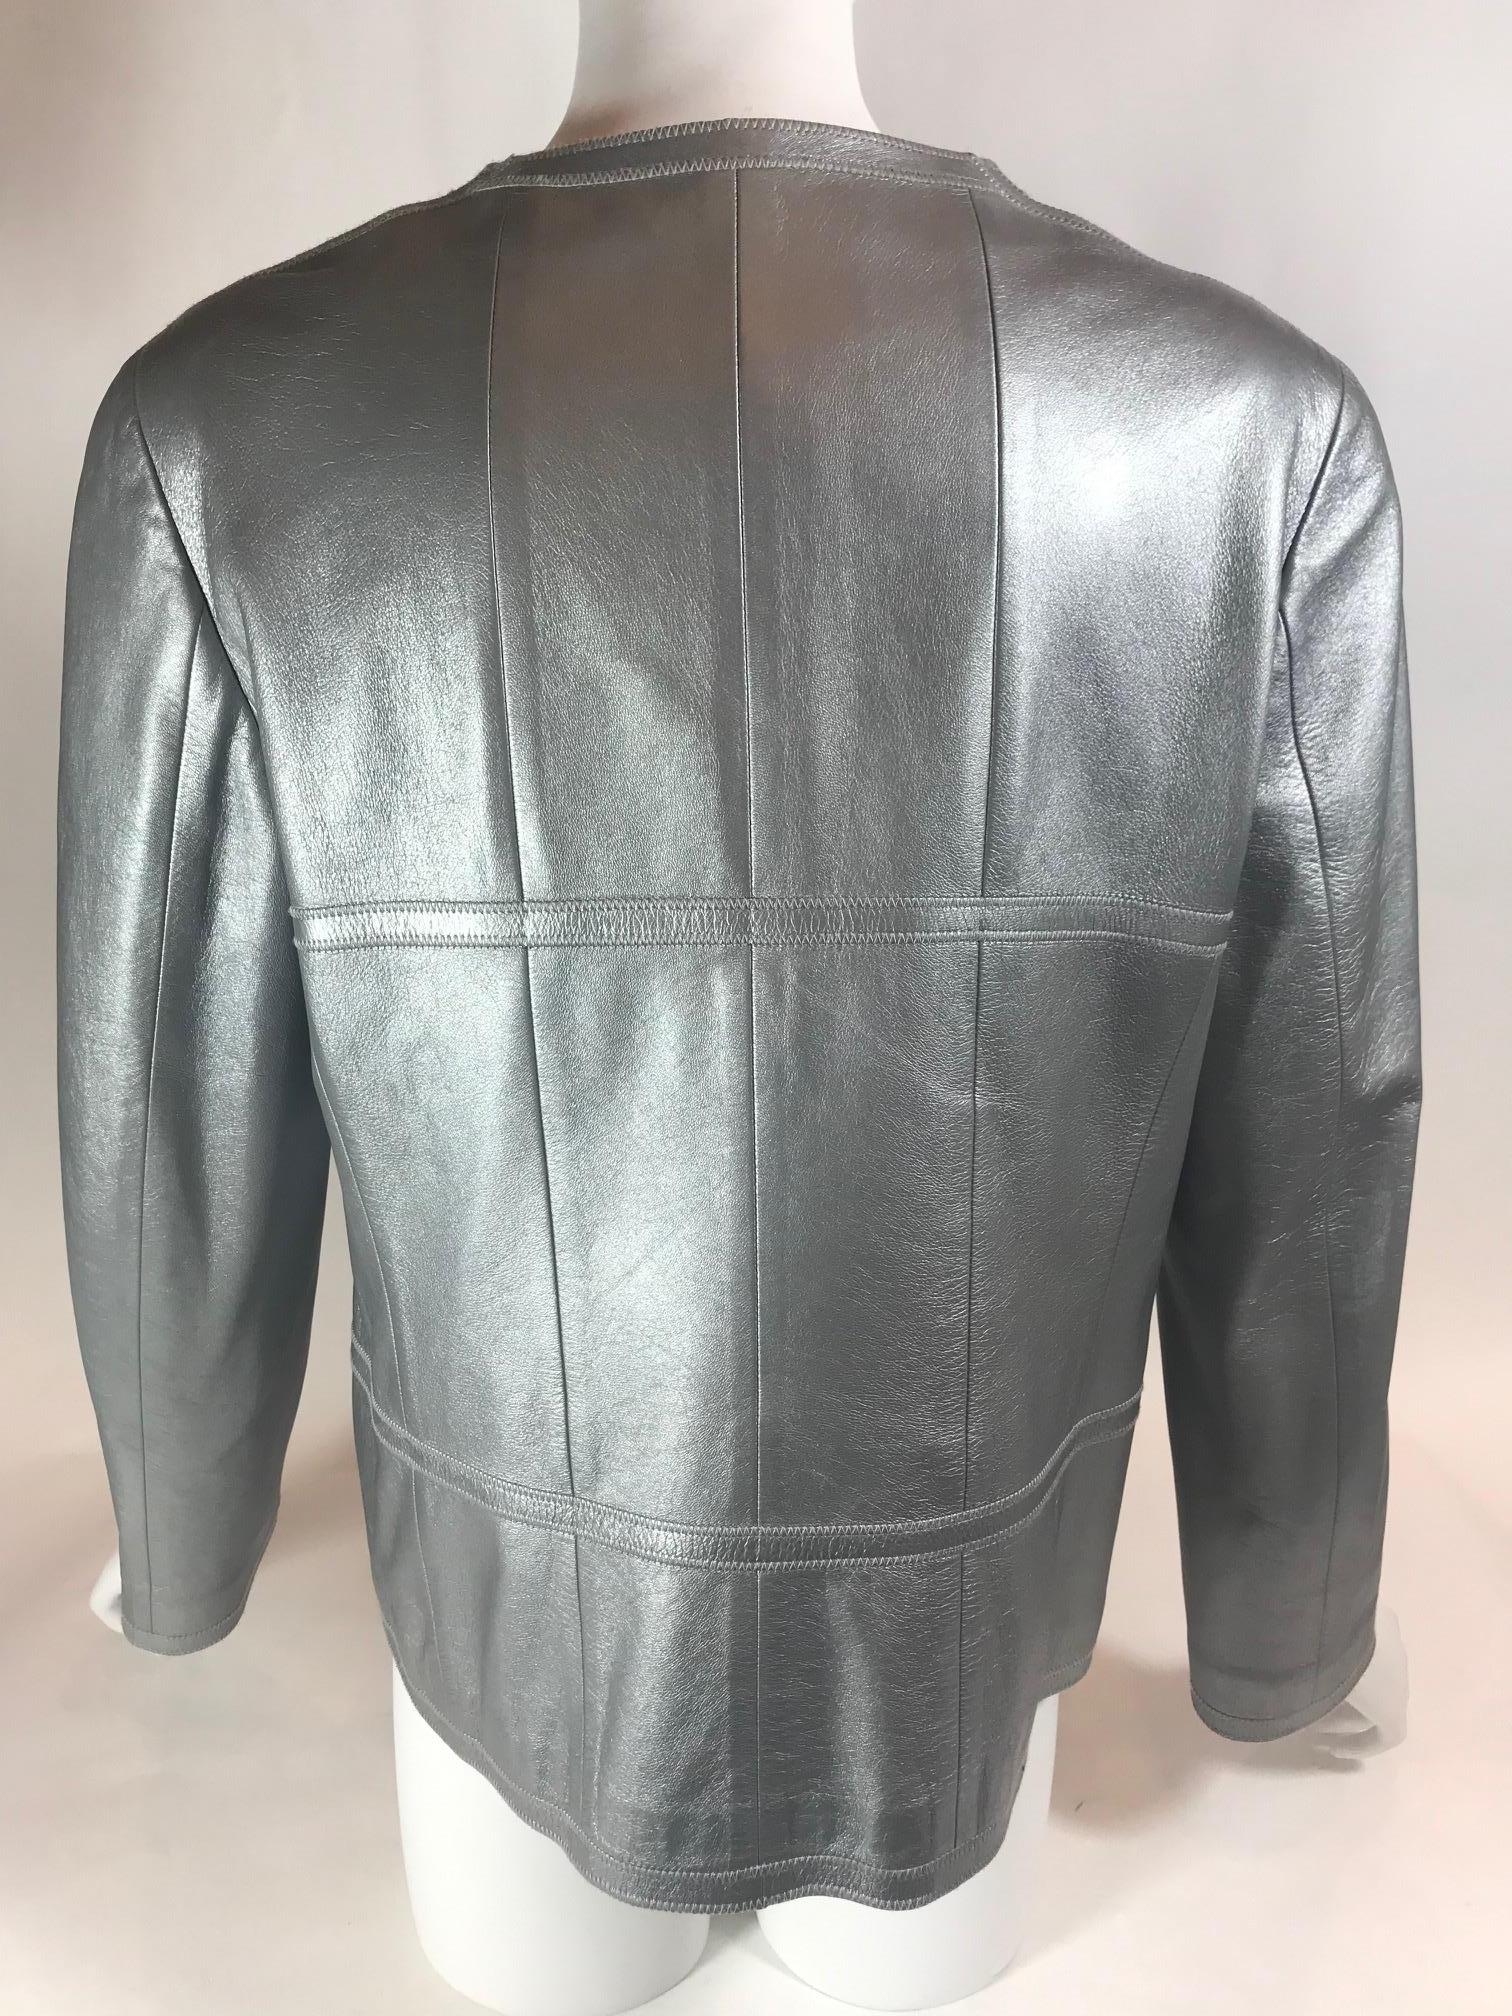 Chanel Vintage Leather Jacket In Good Condition For Sale In Roslyn, NY